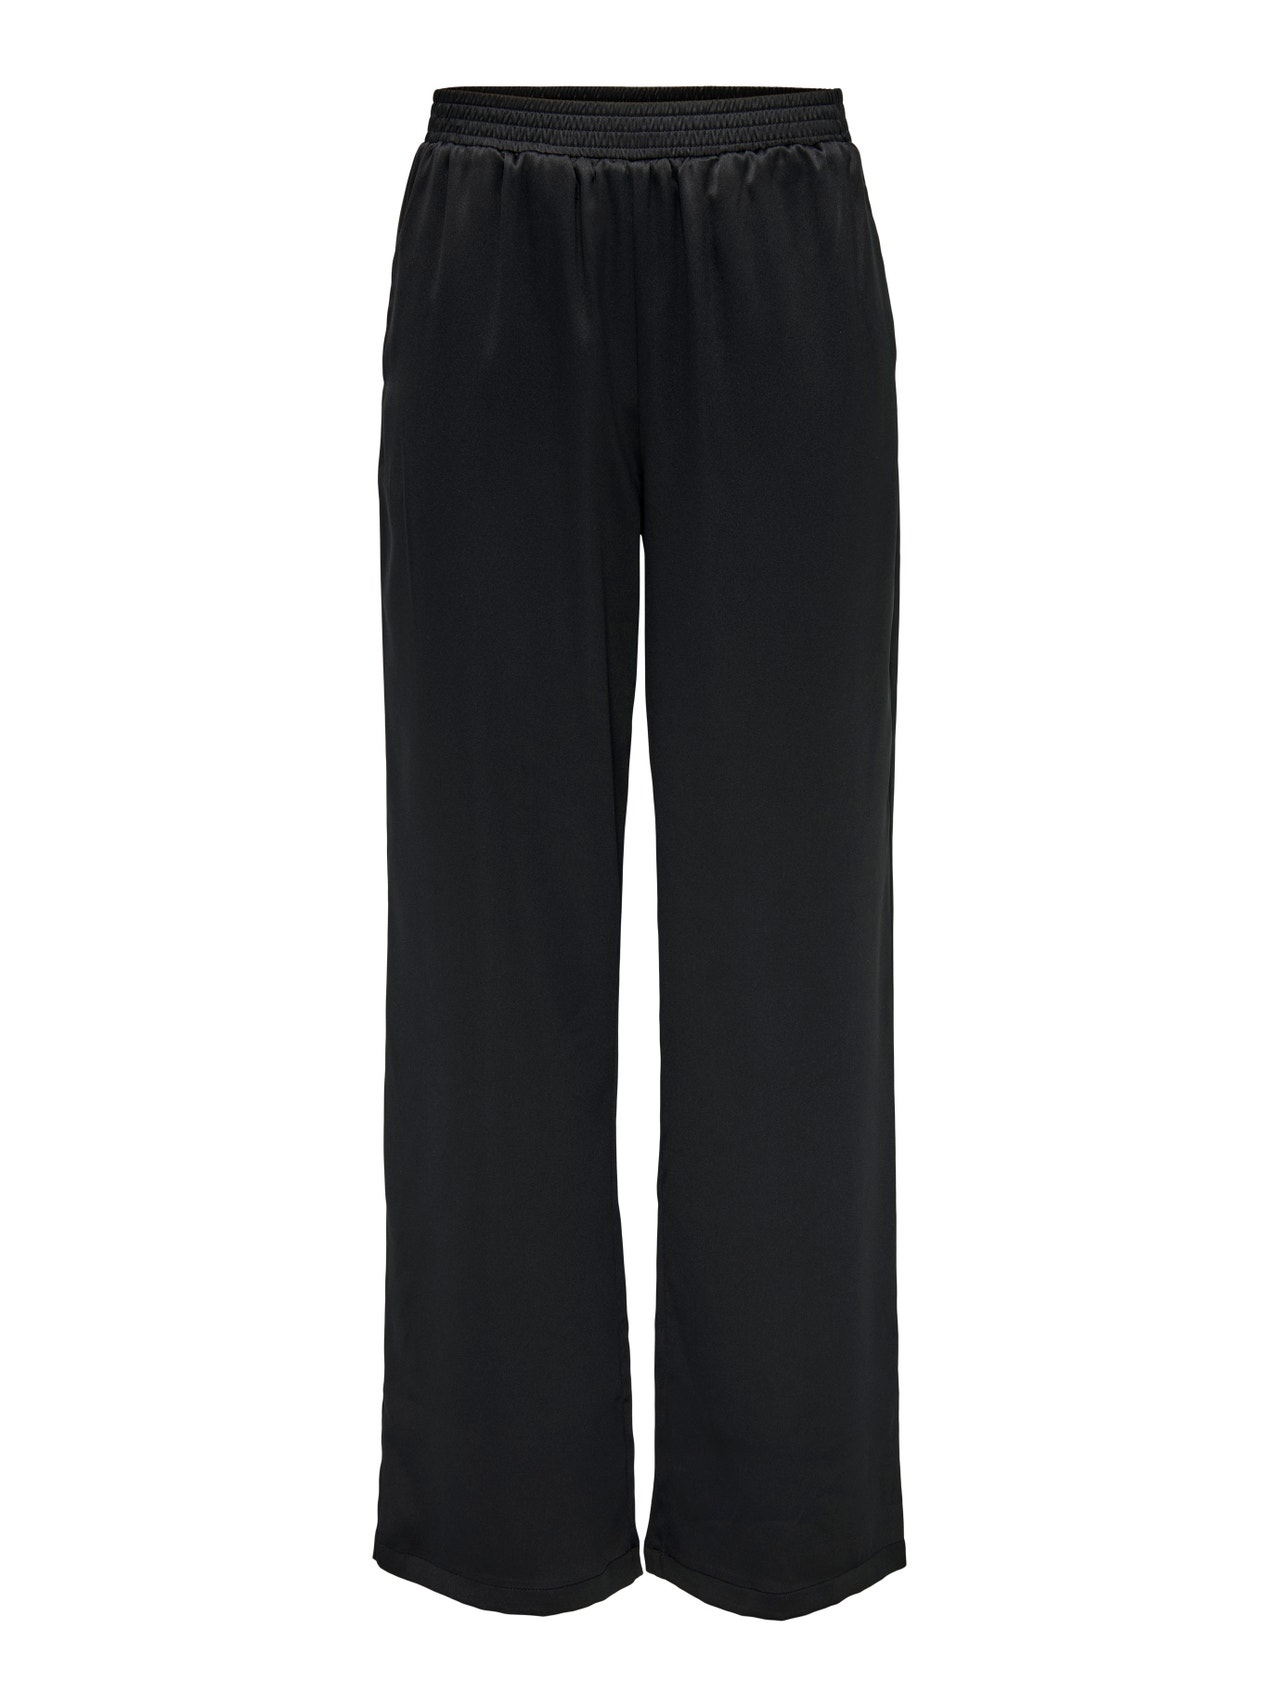 ONLY Satin Trousers -Black - 15280101